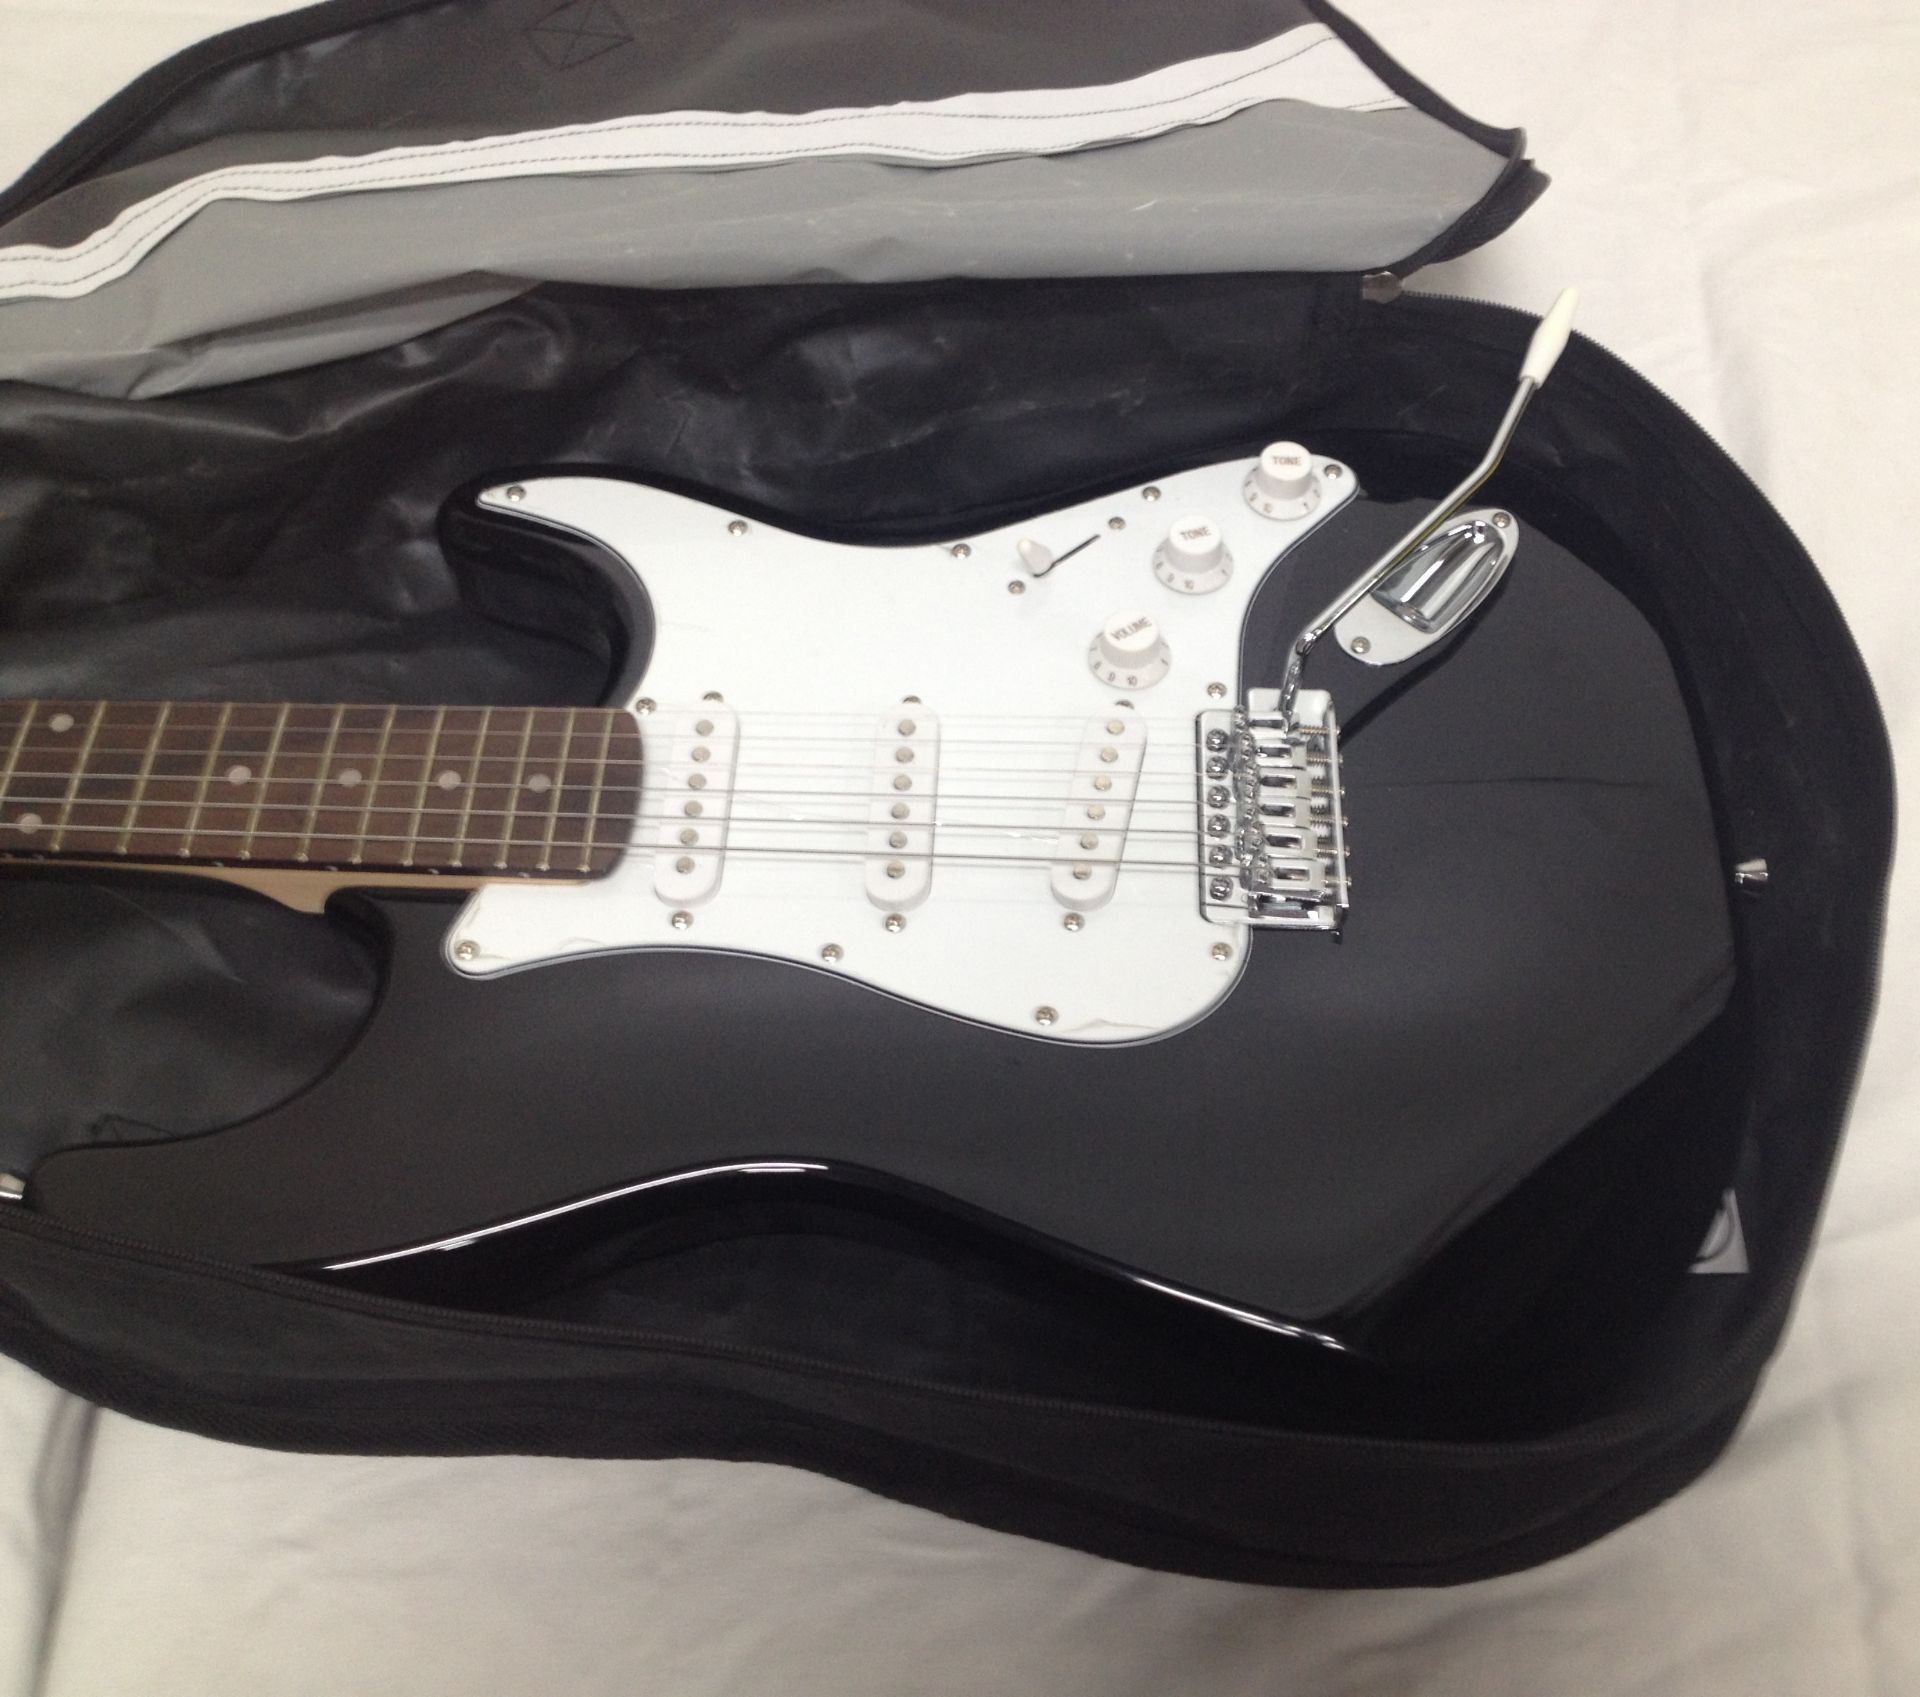 Aria Pro2 STG0003 Electric Guitar in Black and White; with Case - Image 3 of 4